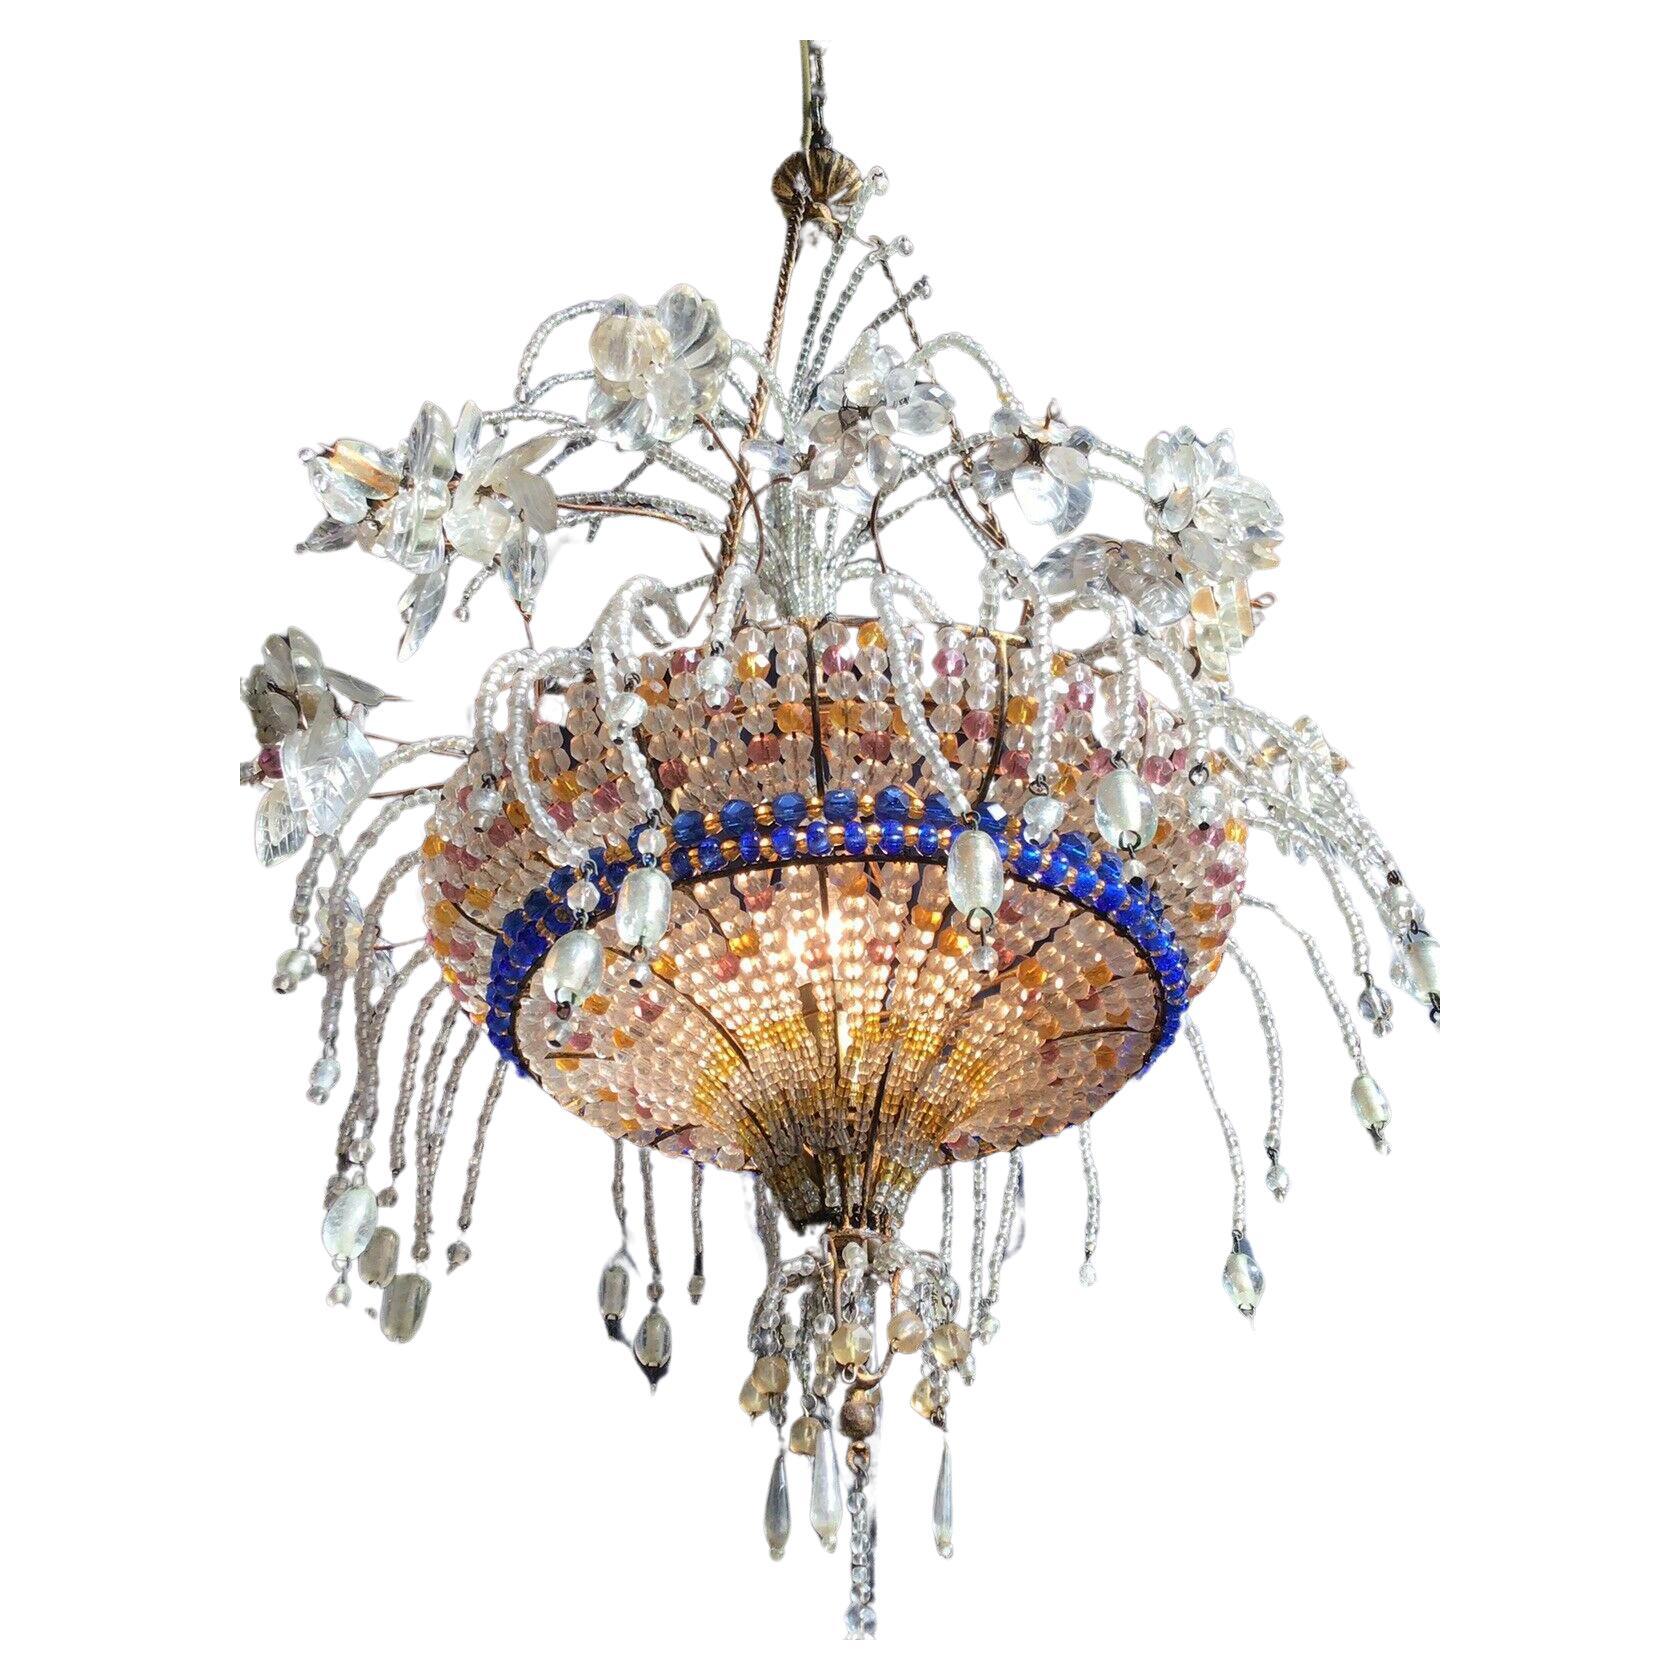 19thc French Louis XV style "Floral Fireworks" Chandelier by Maison Bagues Paris For Sale